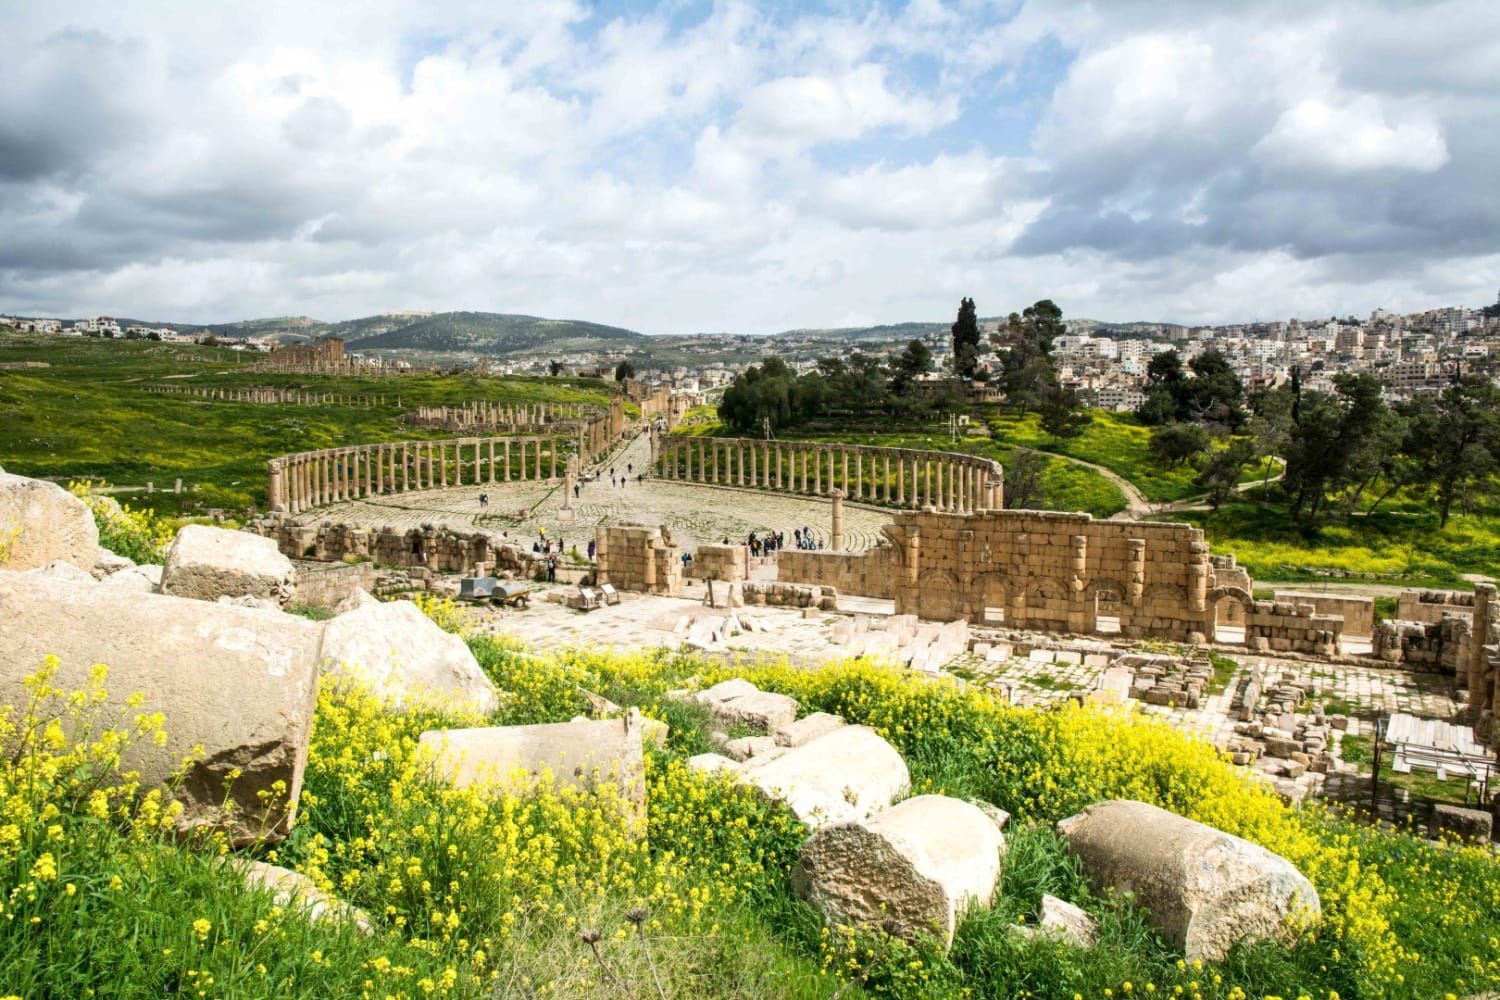 Visiting Jerash - The Pompeii of the Middle East - the unending journey